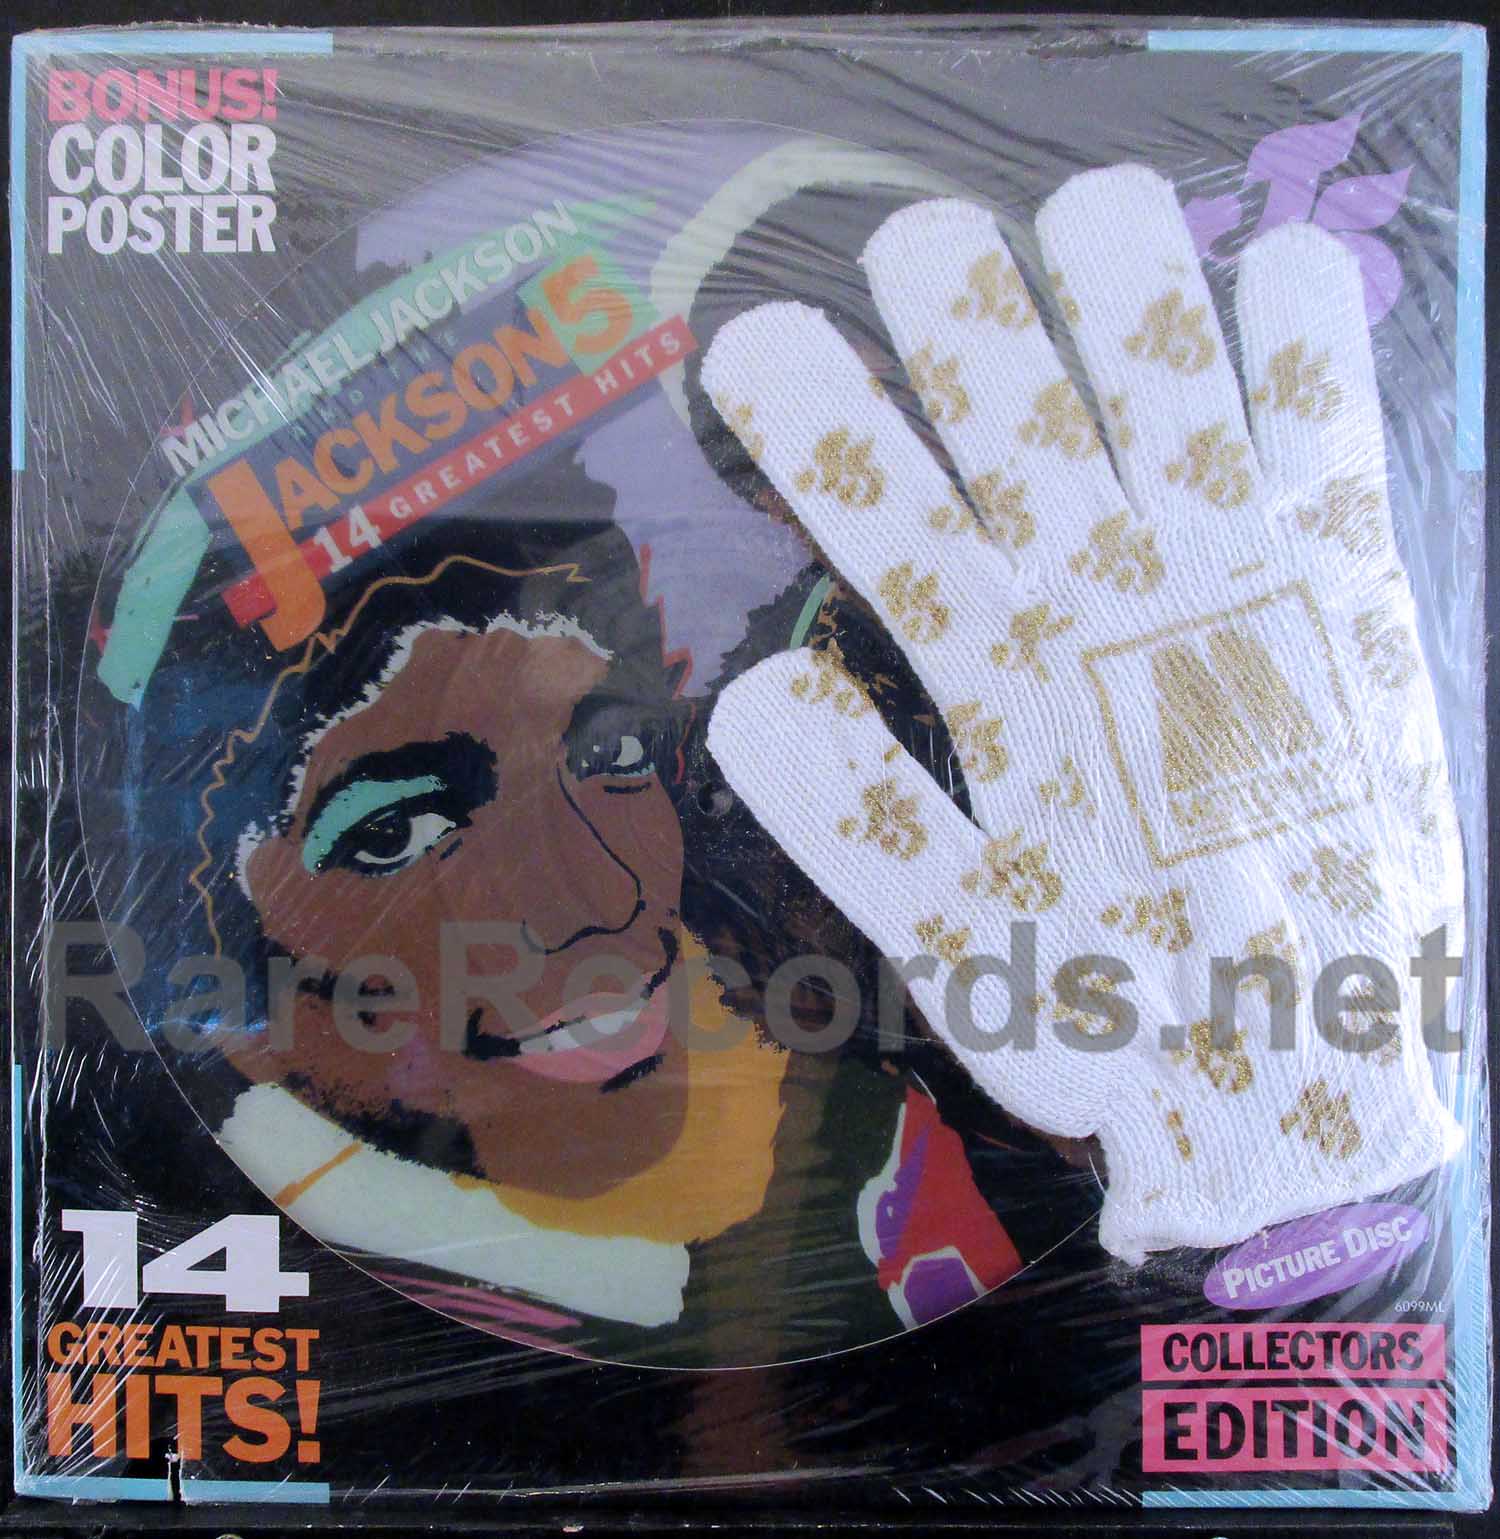 Michael Jackson – 14 Greatest Hits sealed U.S. picture disc LP